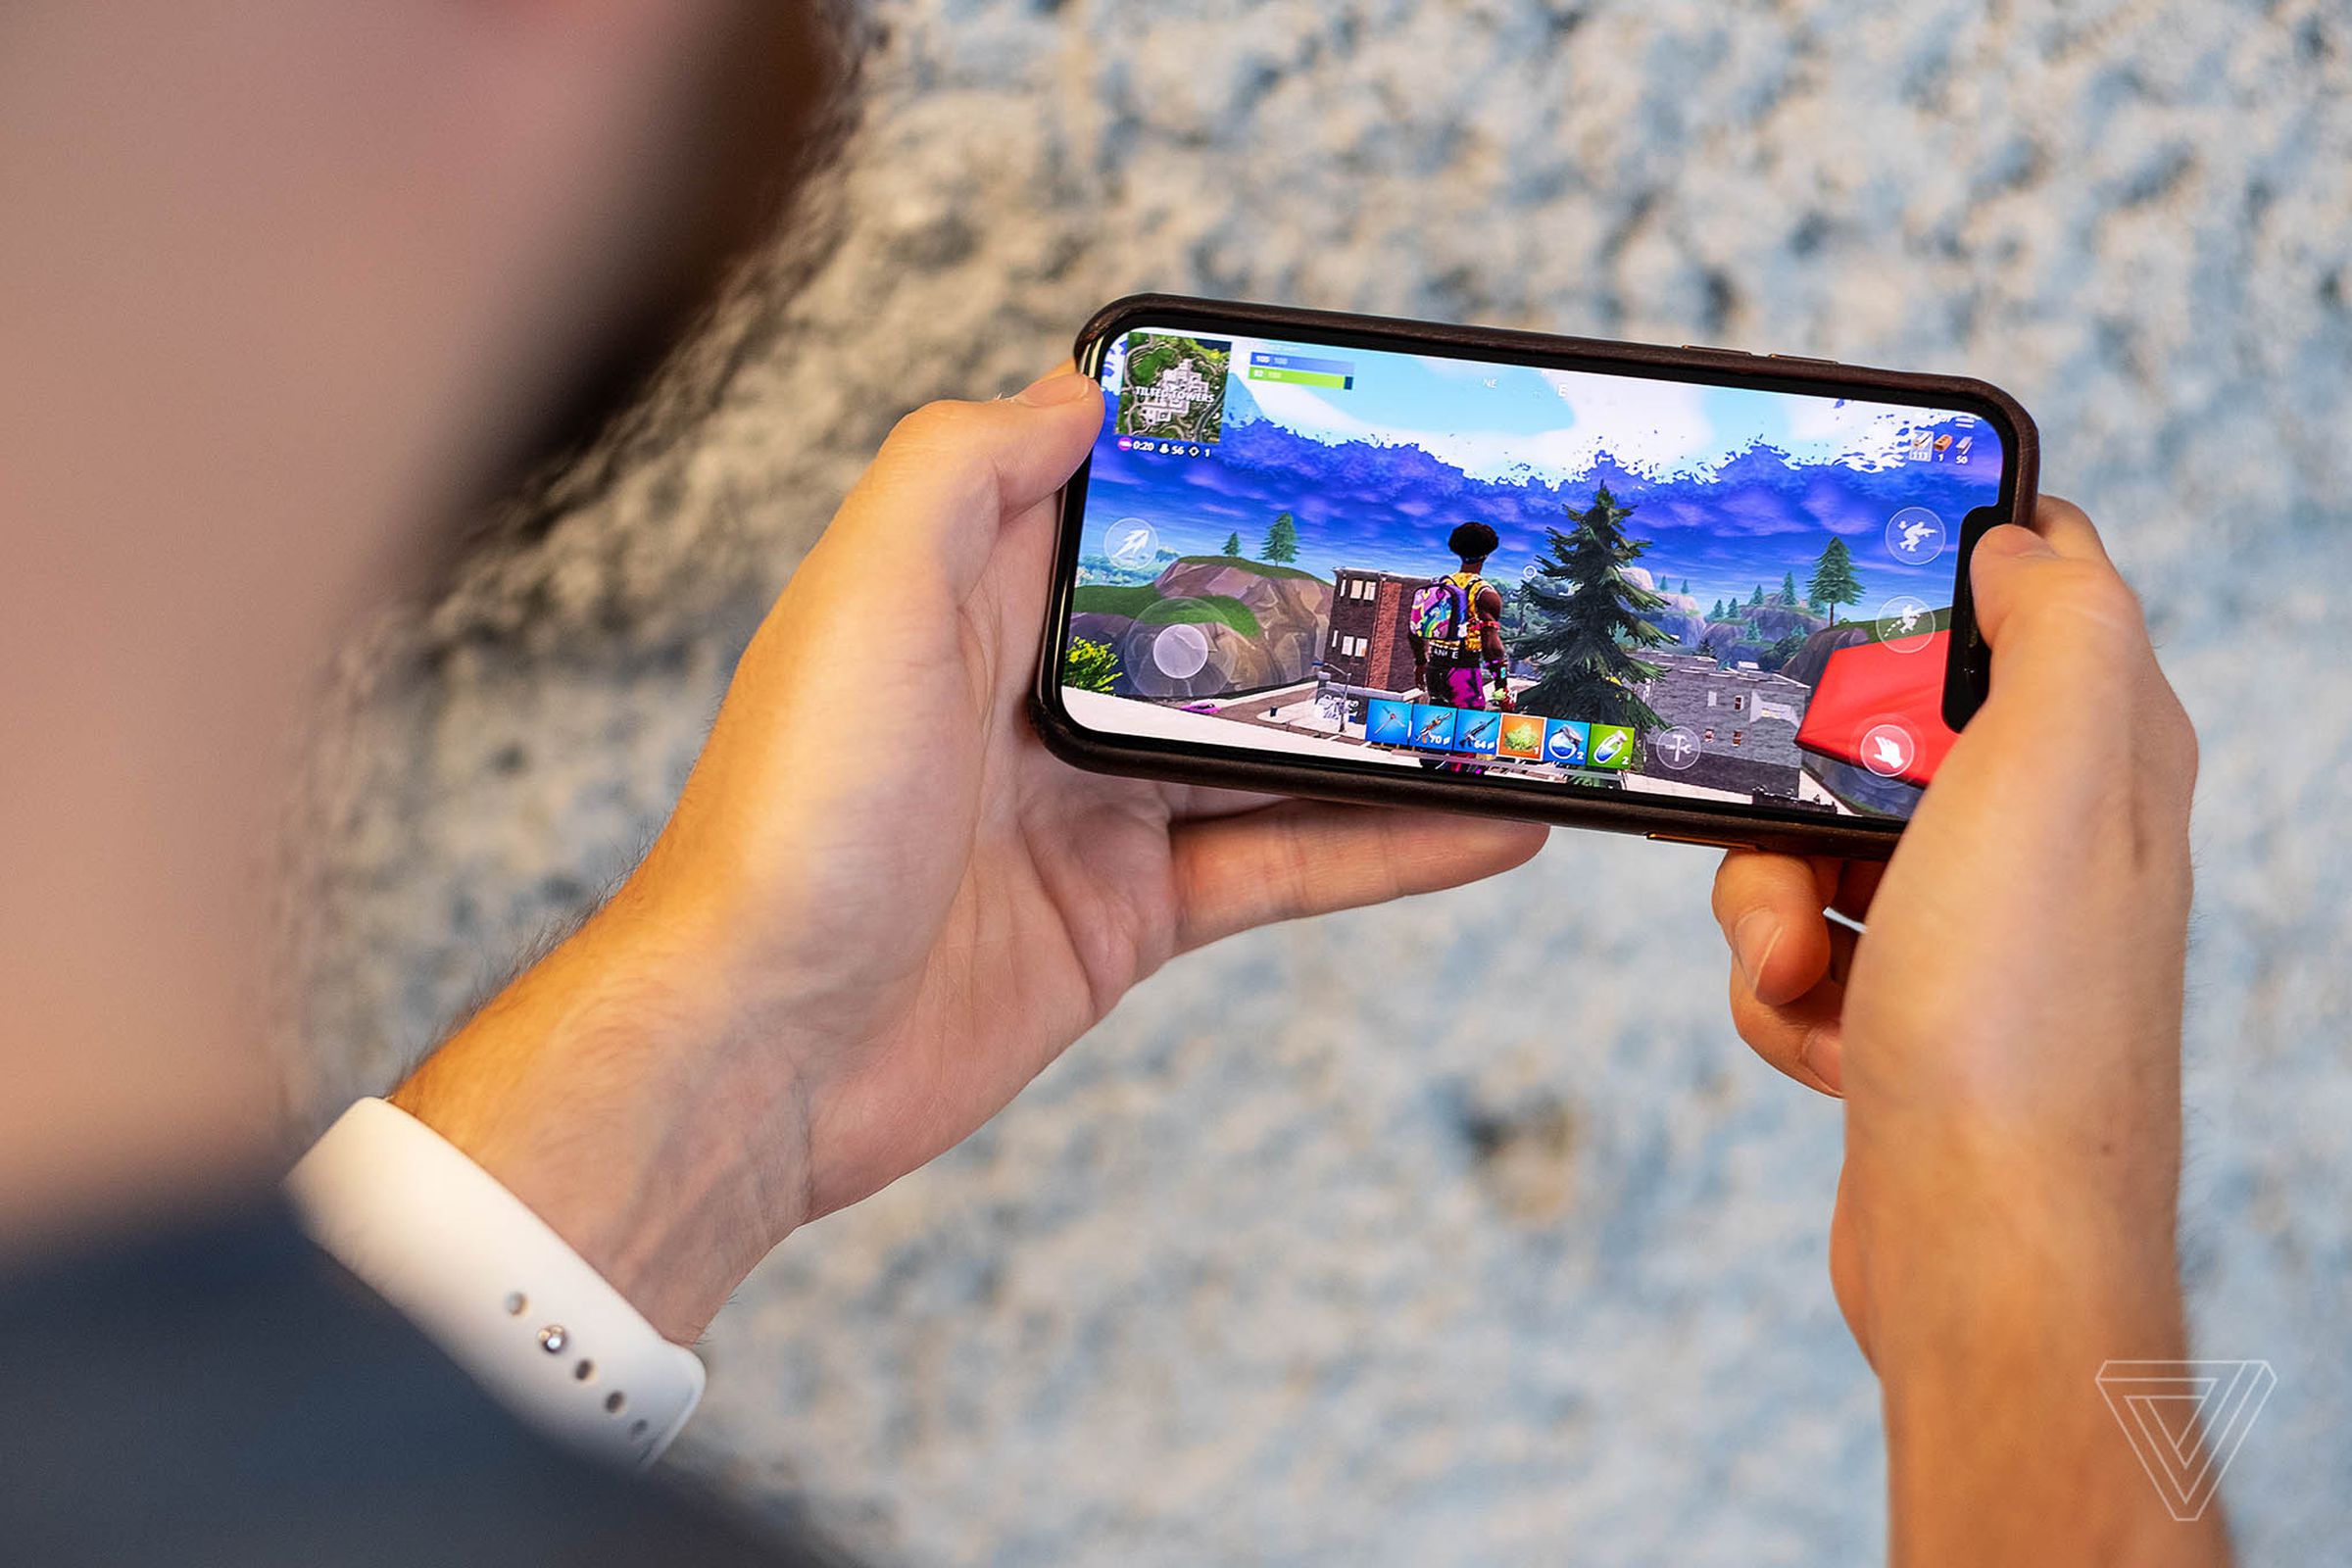 Fortnite running on an iPhone, which is something you currently can’t do.